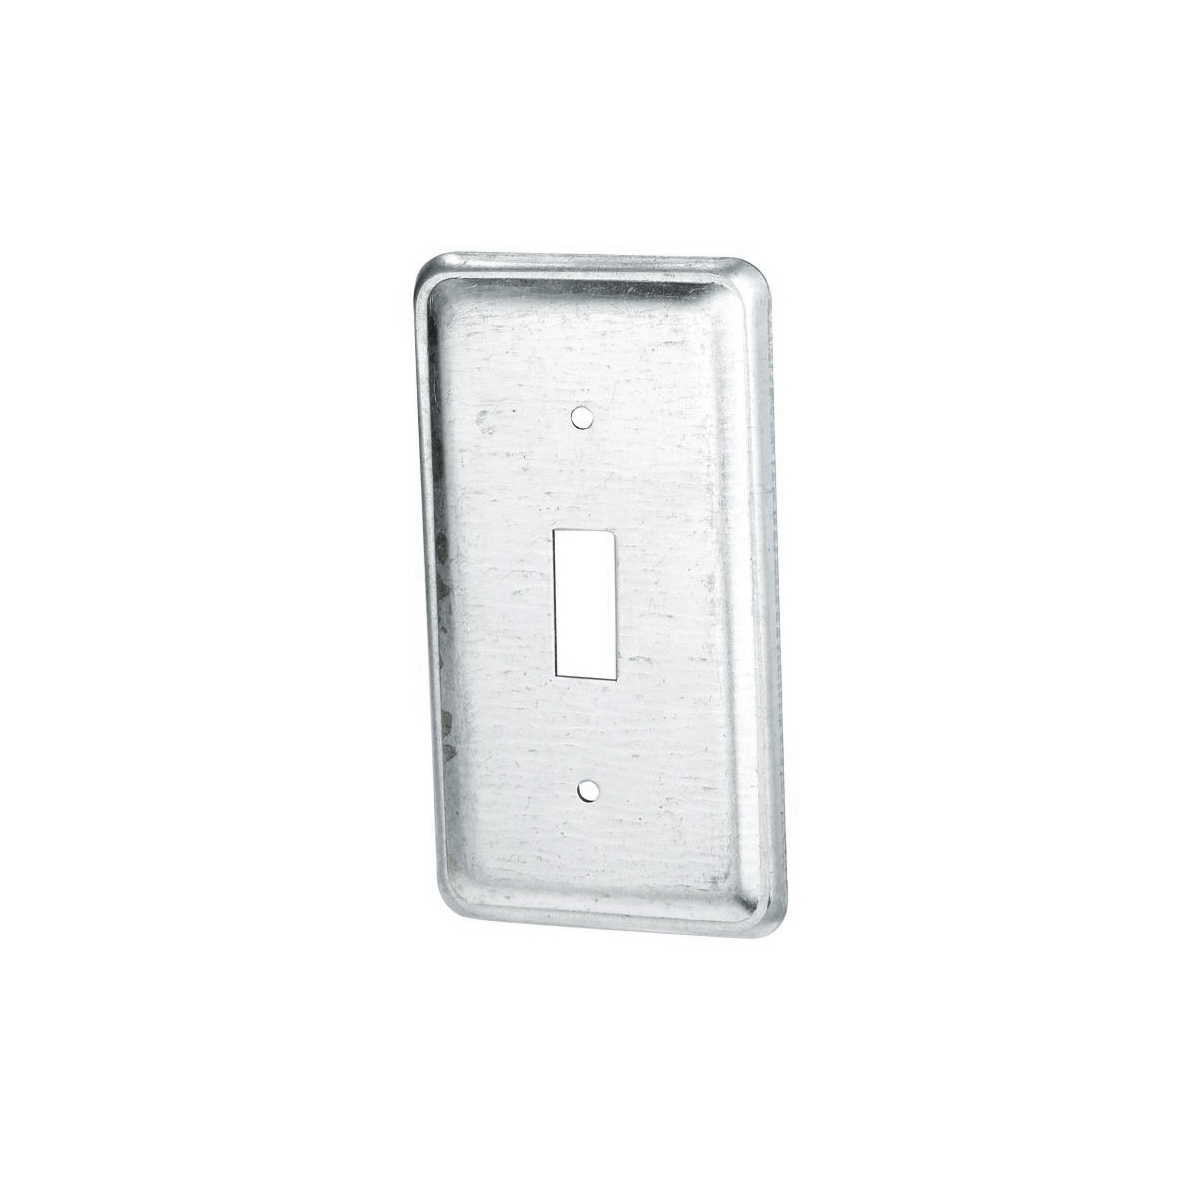 Steel Rectangular Toggle Switch Handy Box Covers